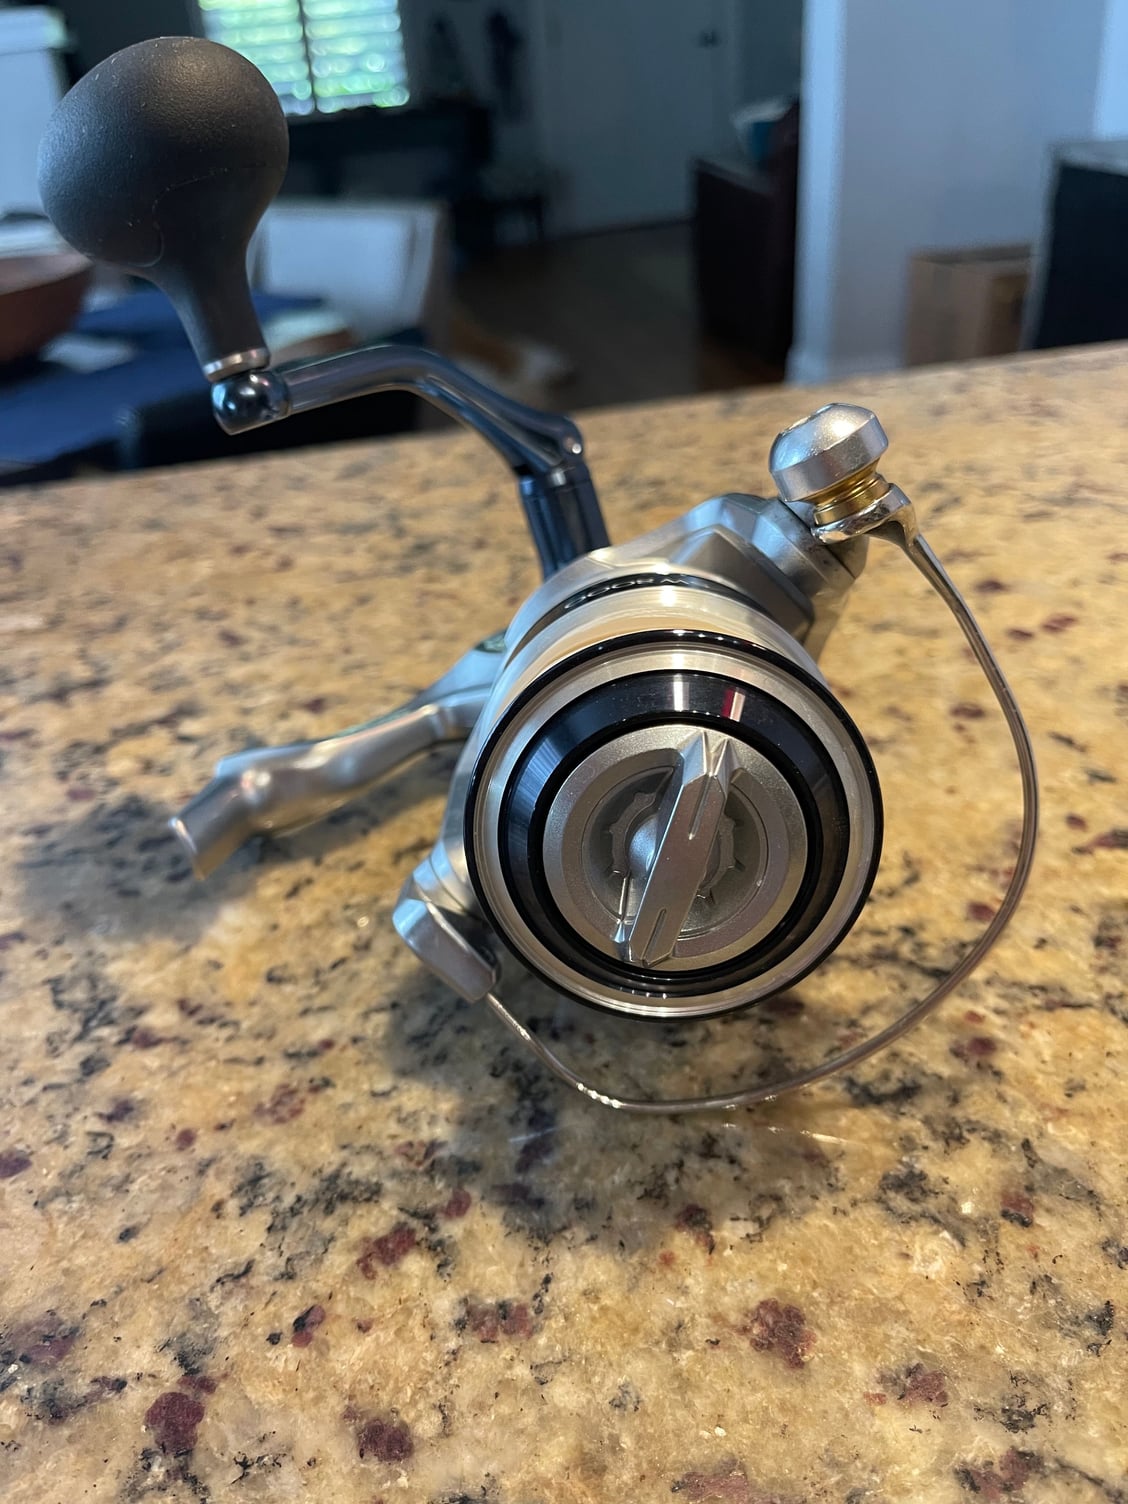 Shimano saragosa sw 8000 - The Hull Truth - Boating and Fishing Forum